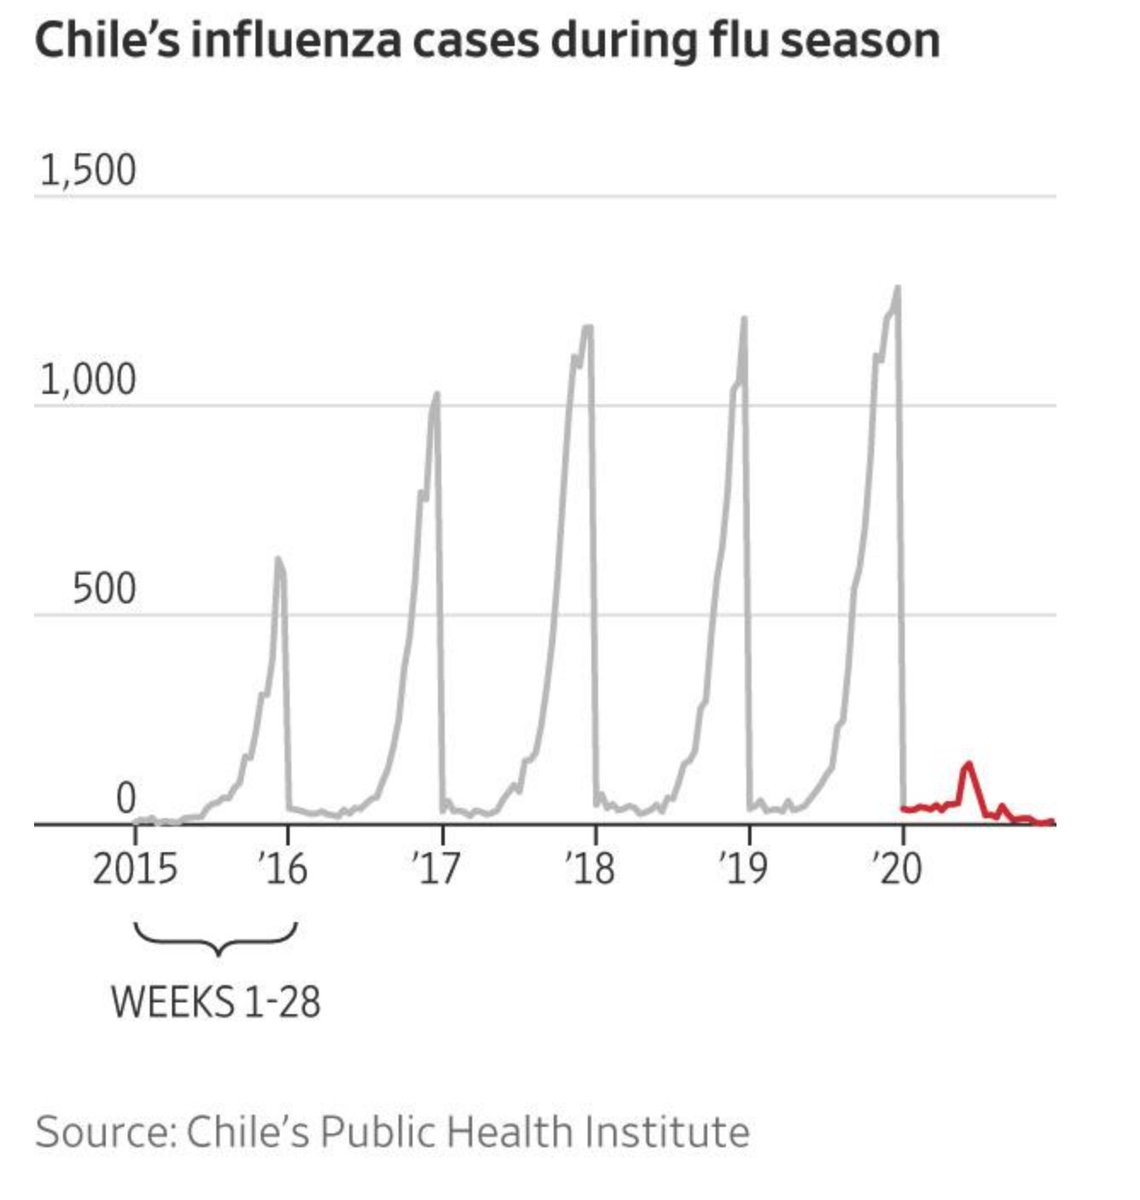 11/22 Some sloppy thinking about flu. With less global travel and more masks, handwashing, distancing, we may have a lot less flu. Look at this striking graph from Chile. An unexpected “health dividend” from Covid action could be less flu. But still, get a flu shot, definitely.